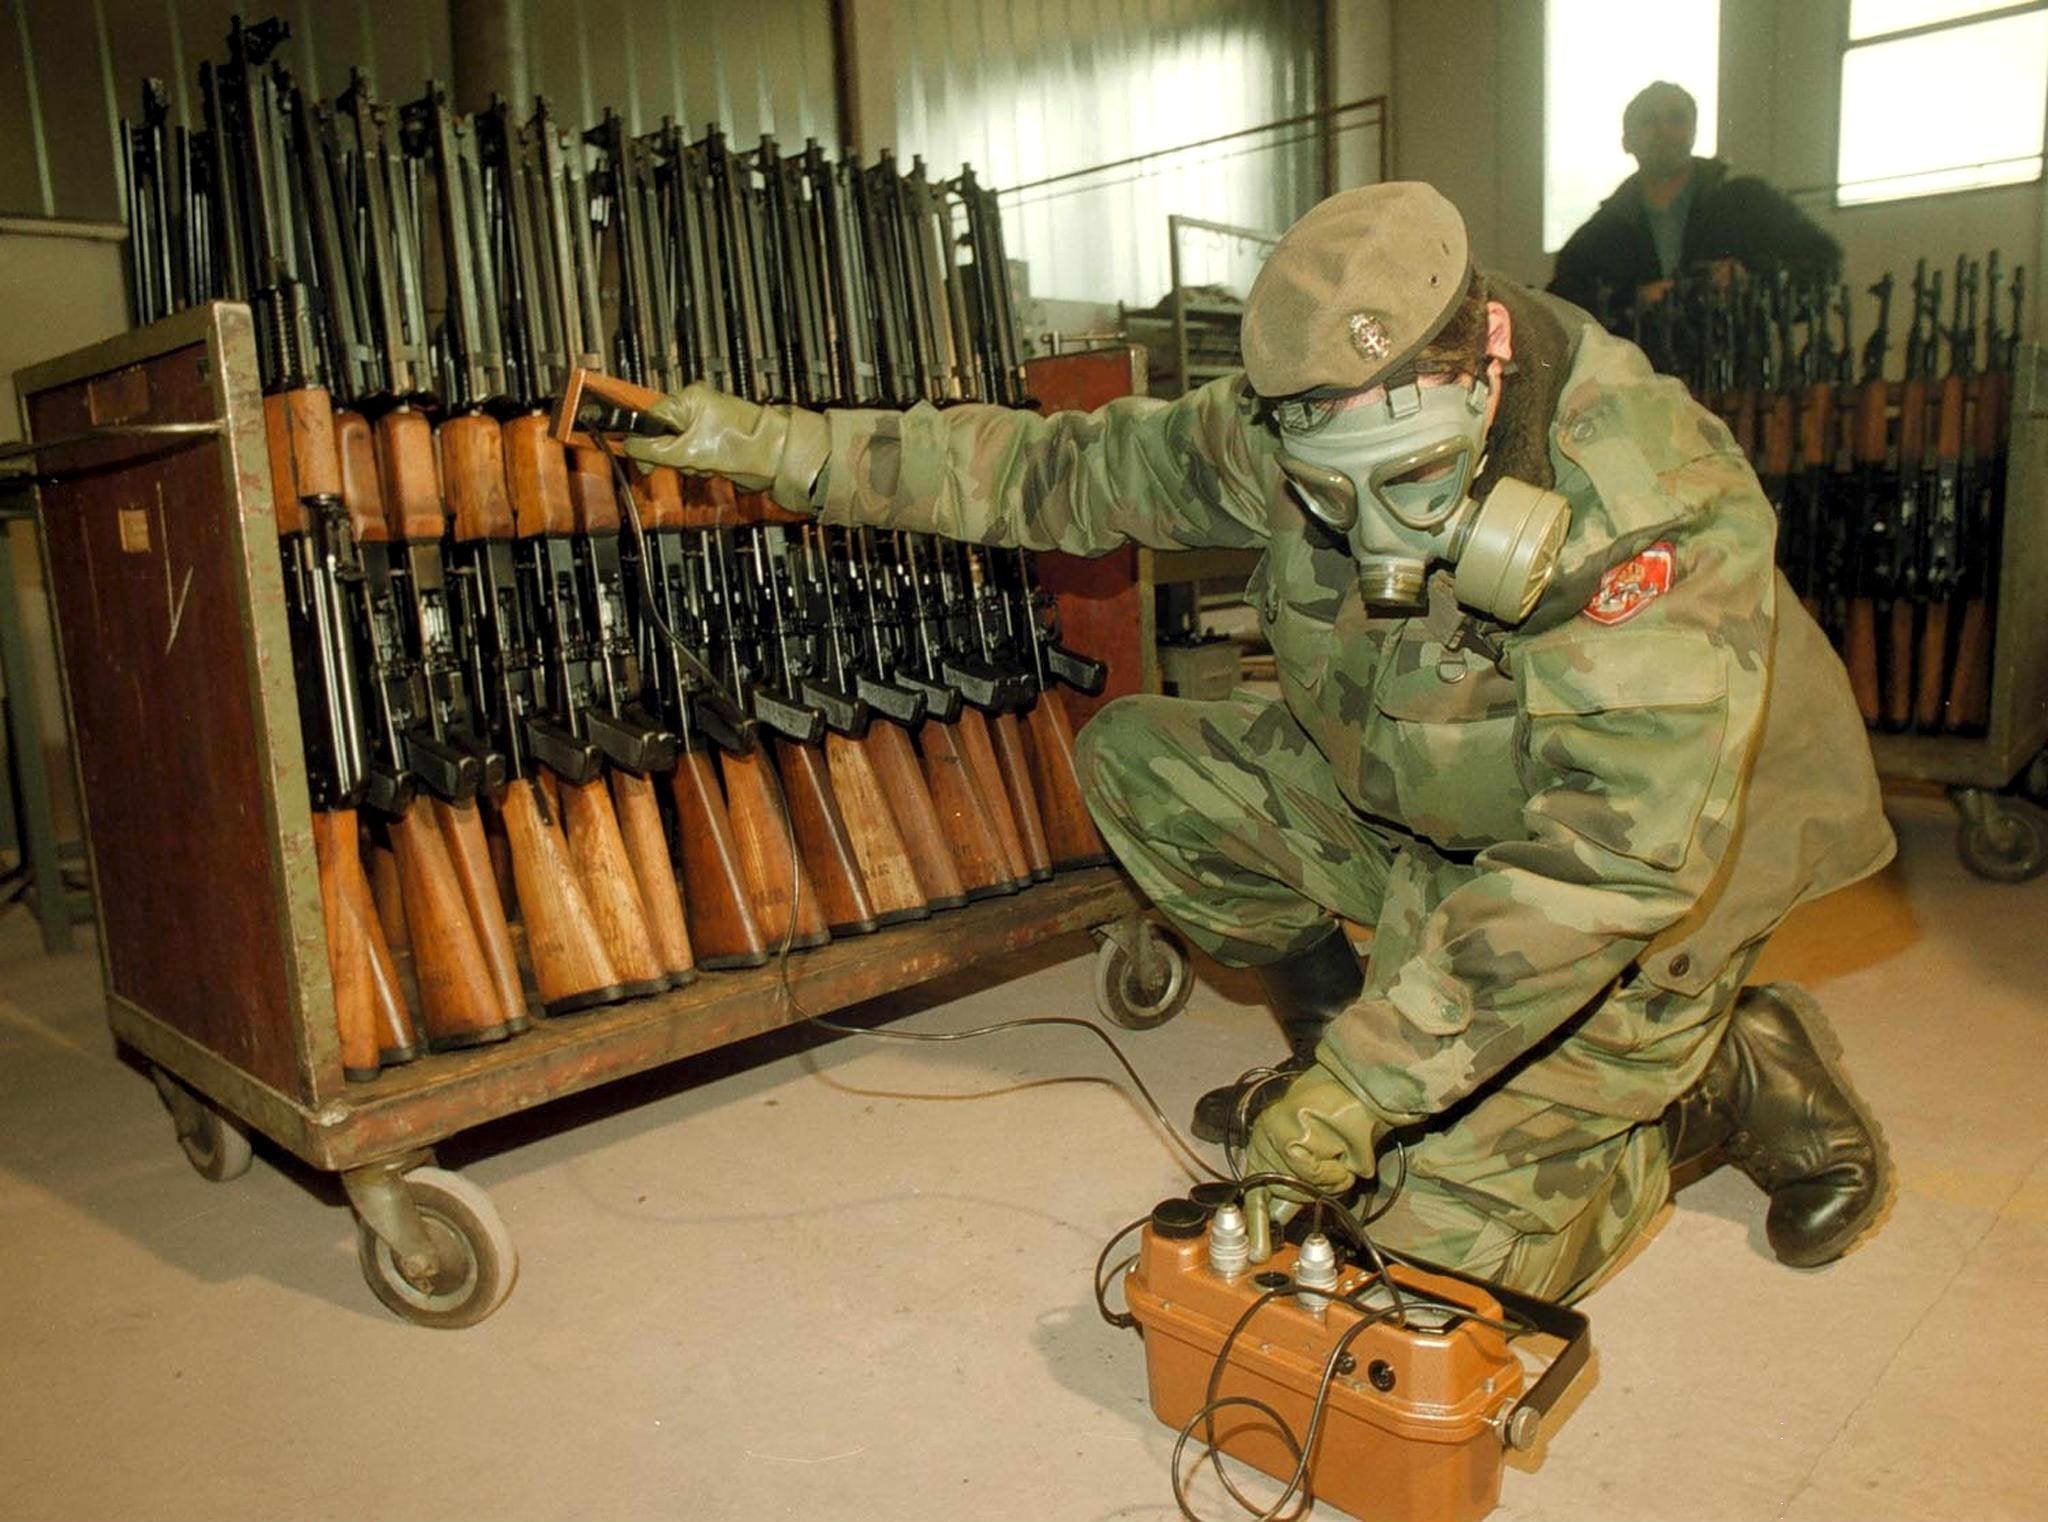 A Bosnian Serb soldier measures radiation levels at a factory in the town of Bratunac